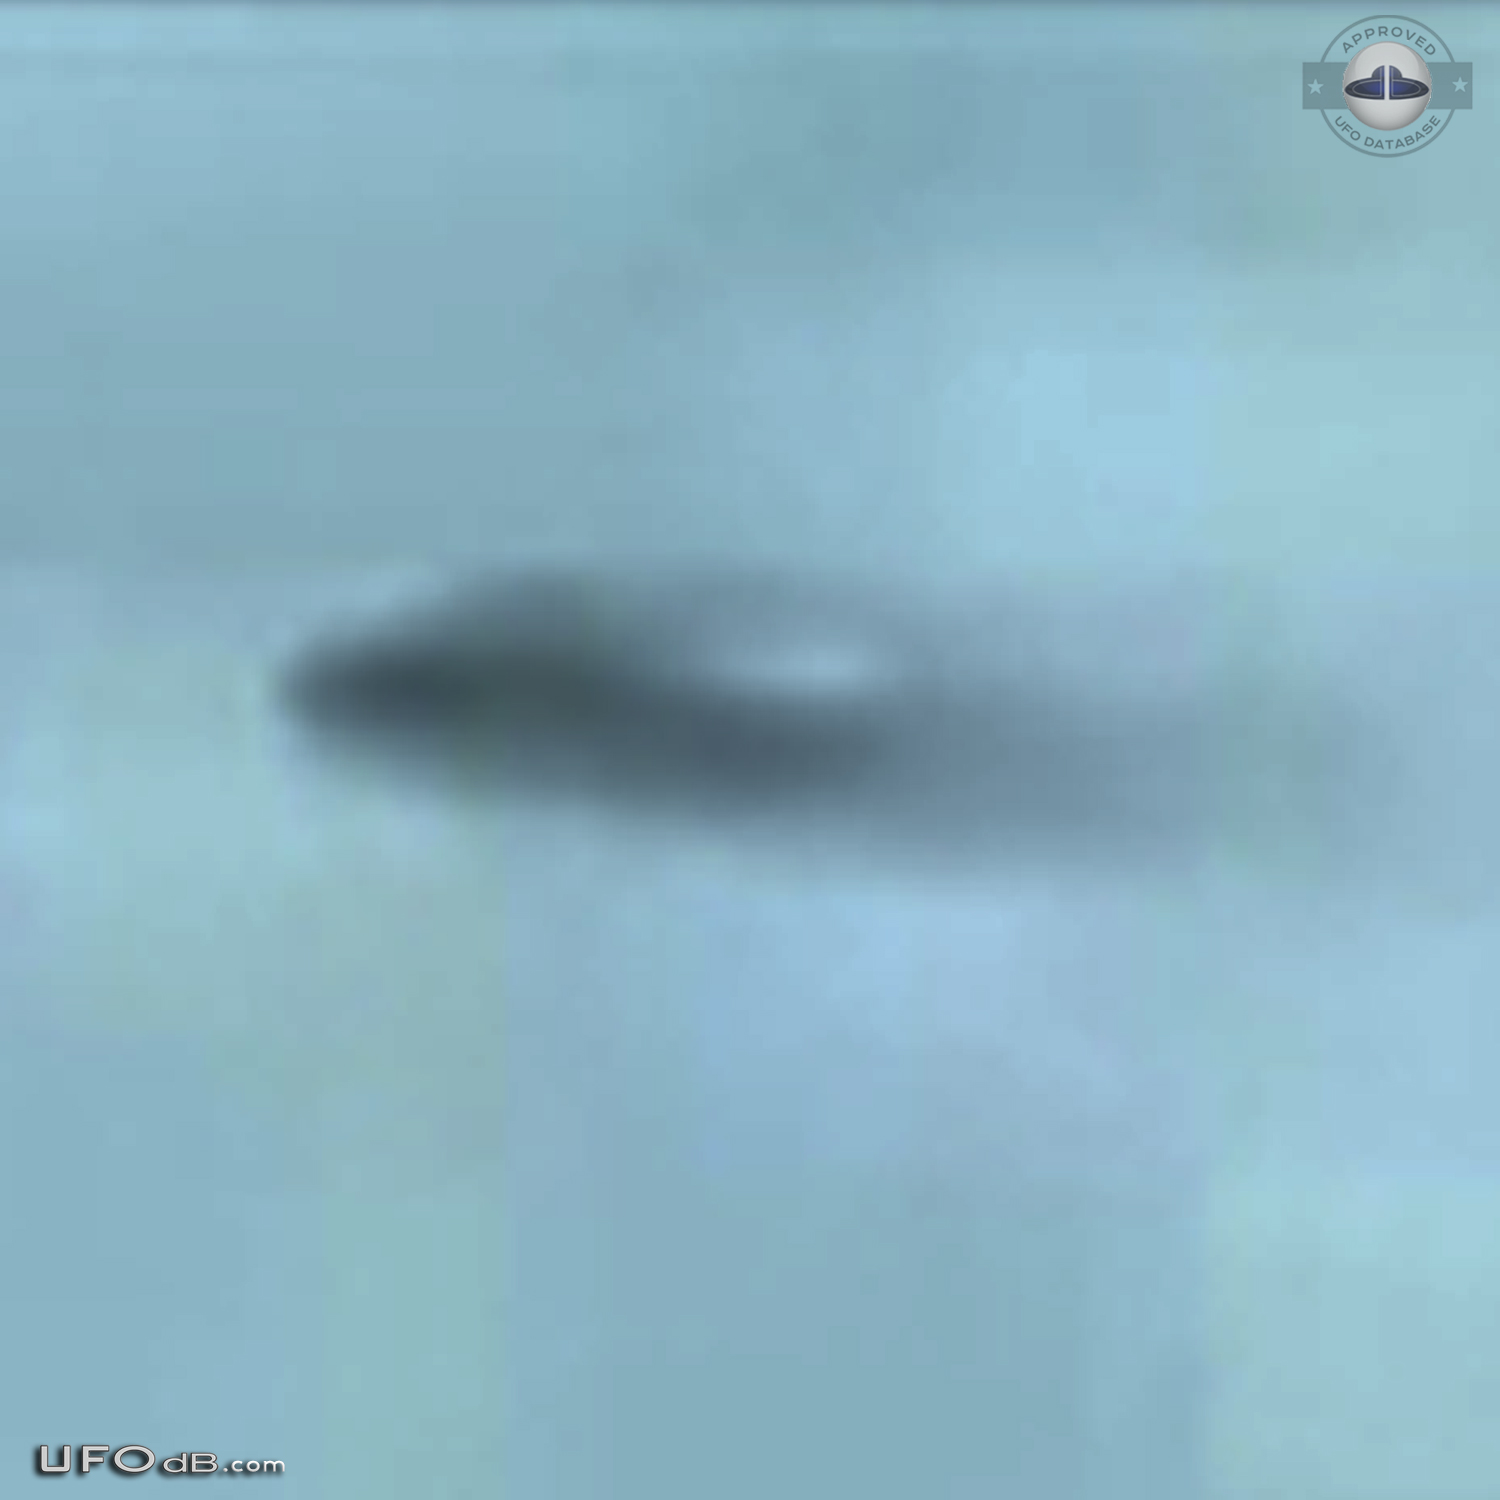 UFO picture from plane taking off Paris Charles de Gaulle airport 2013 UFO Picture #541-6